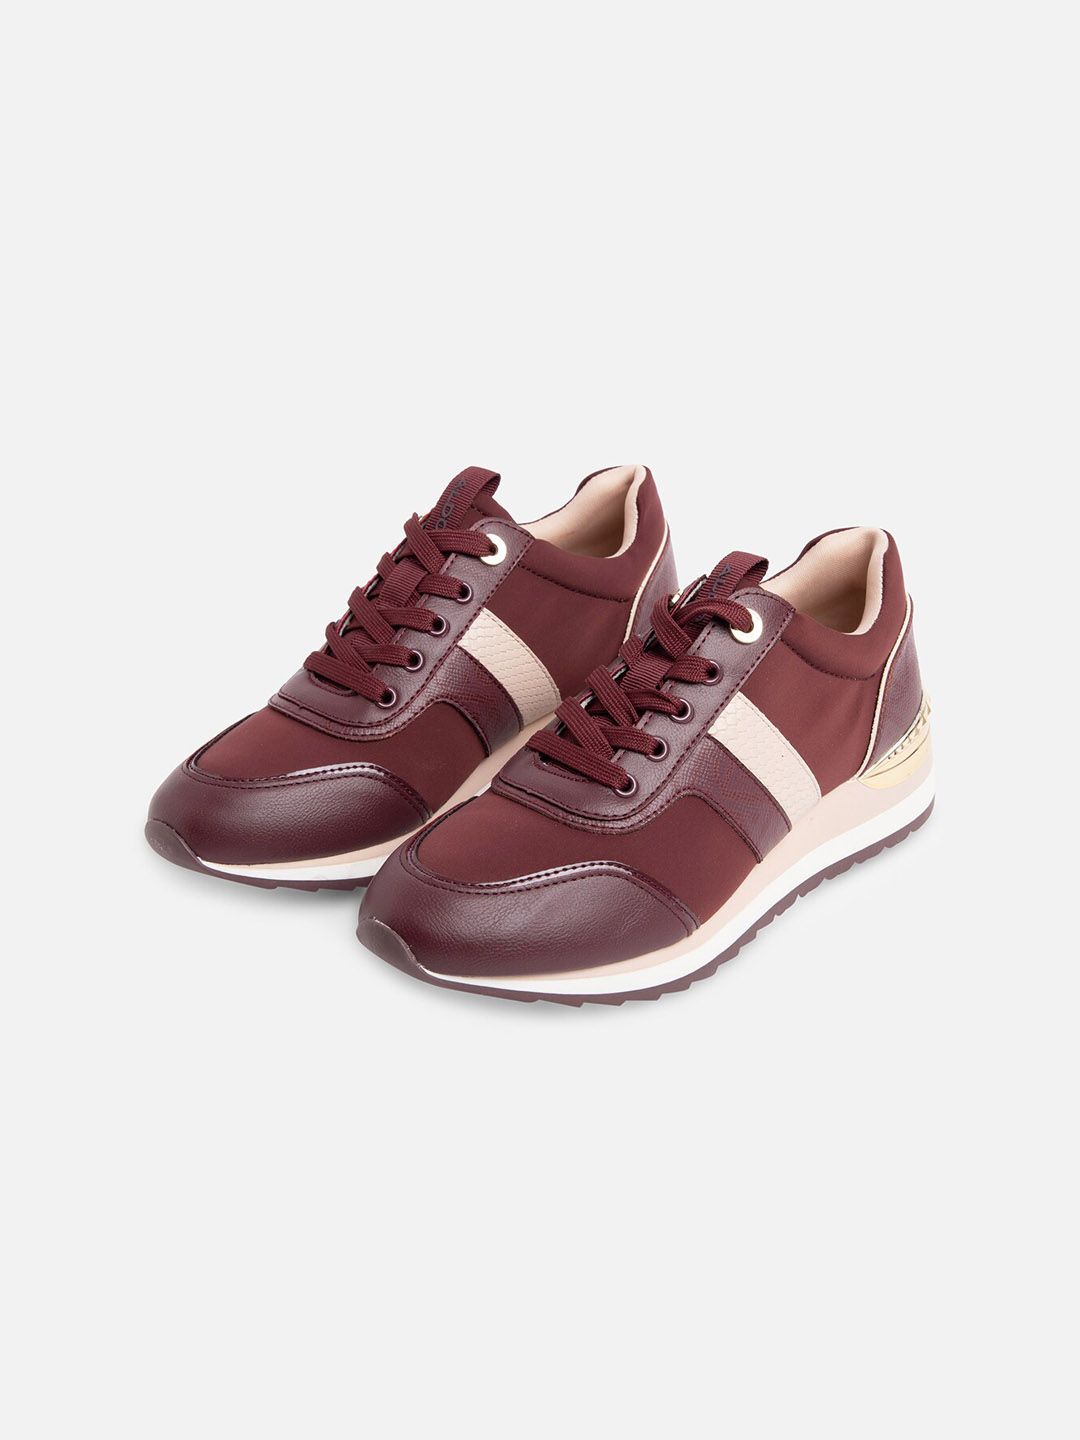 ALDO Women Colourblocked Synthetic Lace-Ups Sneakers Price in India